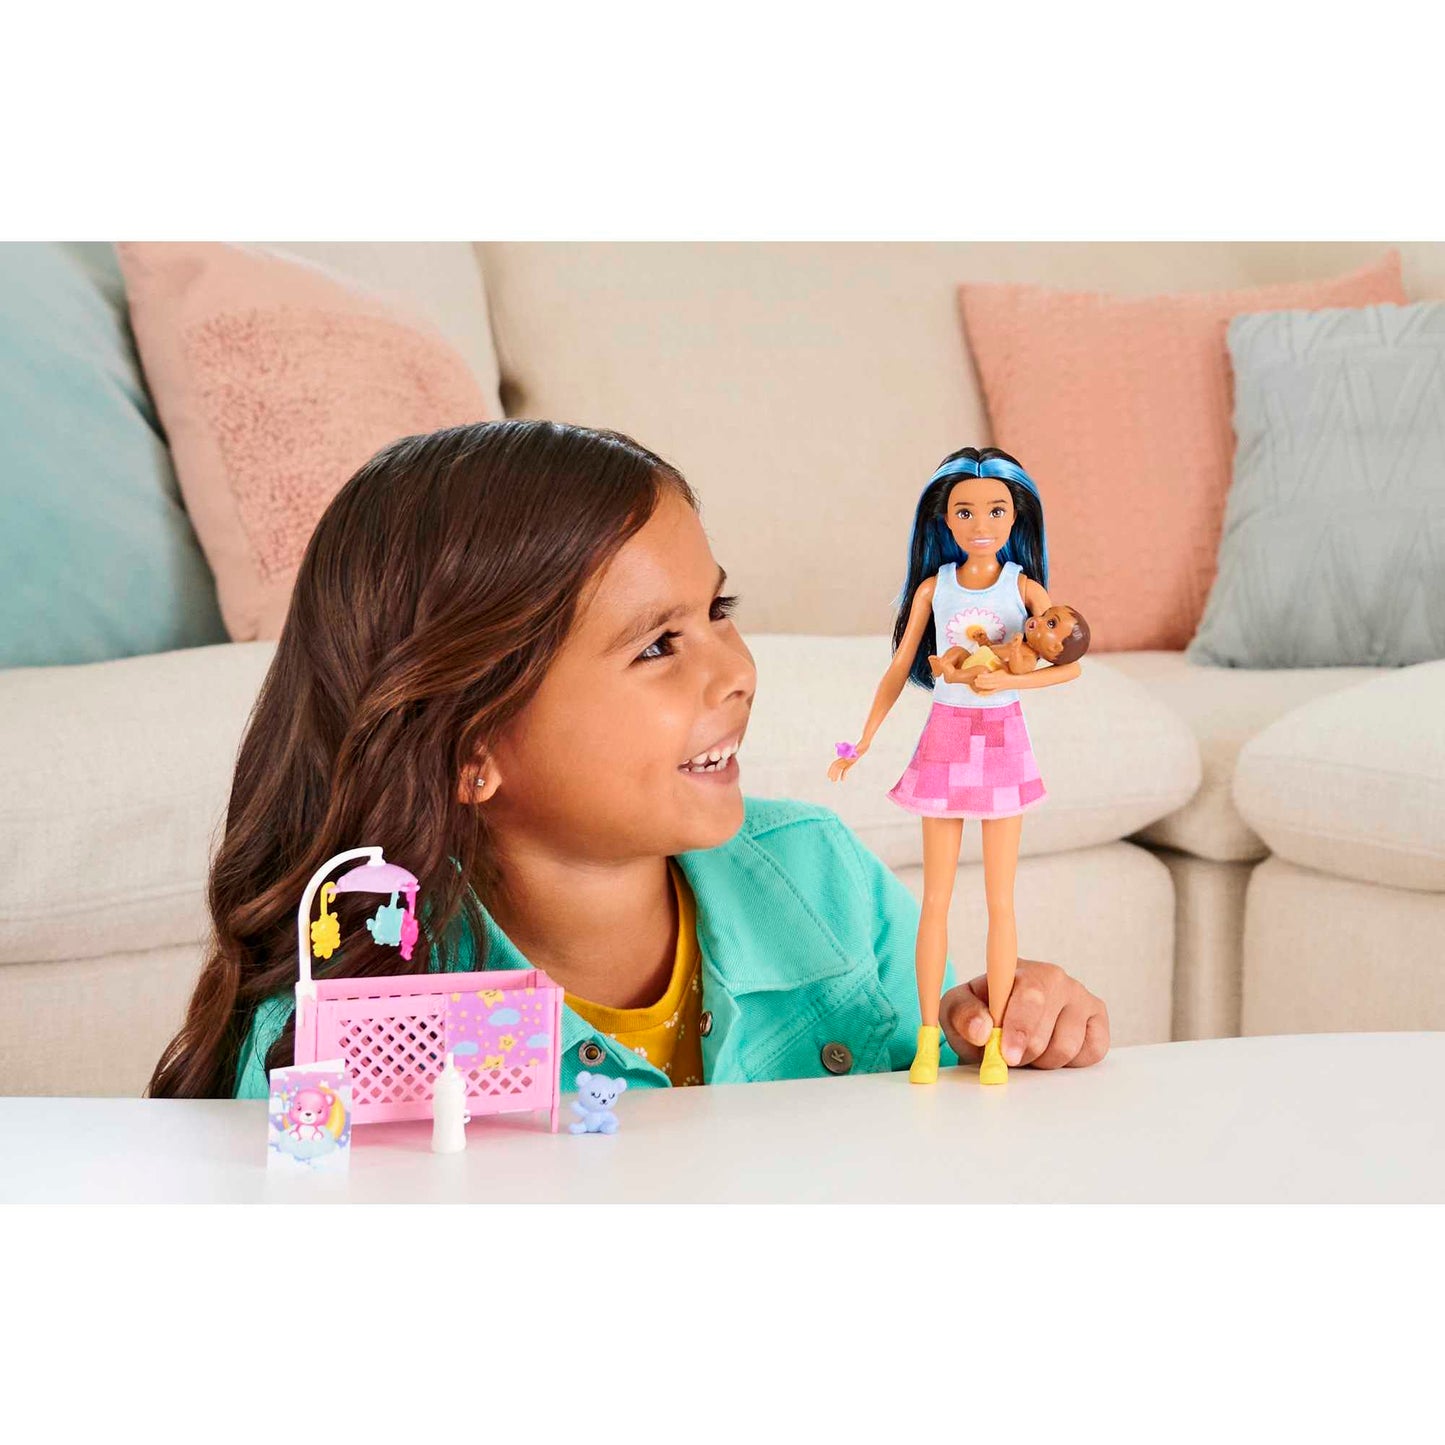 Barbie Skipper Babysitters Inc Dolls and Playset - Assorted*